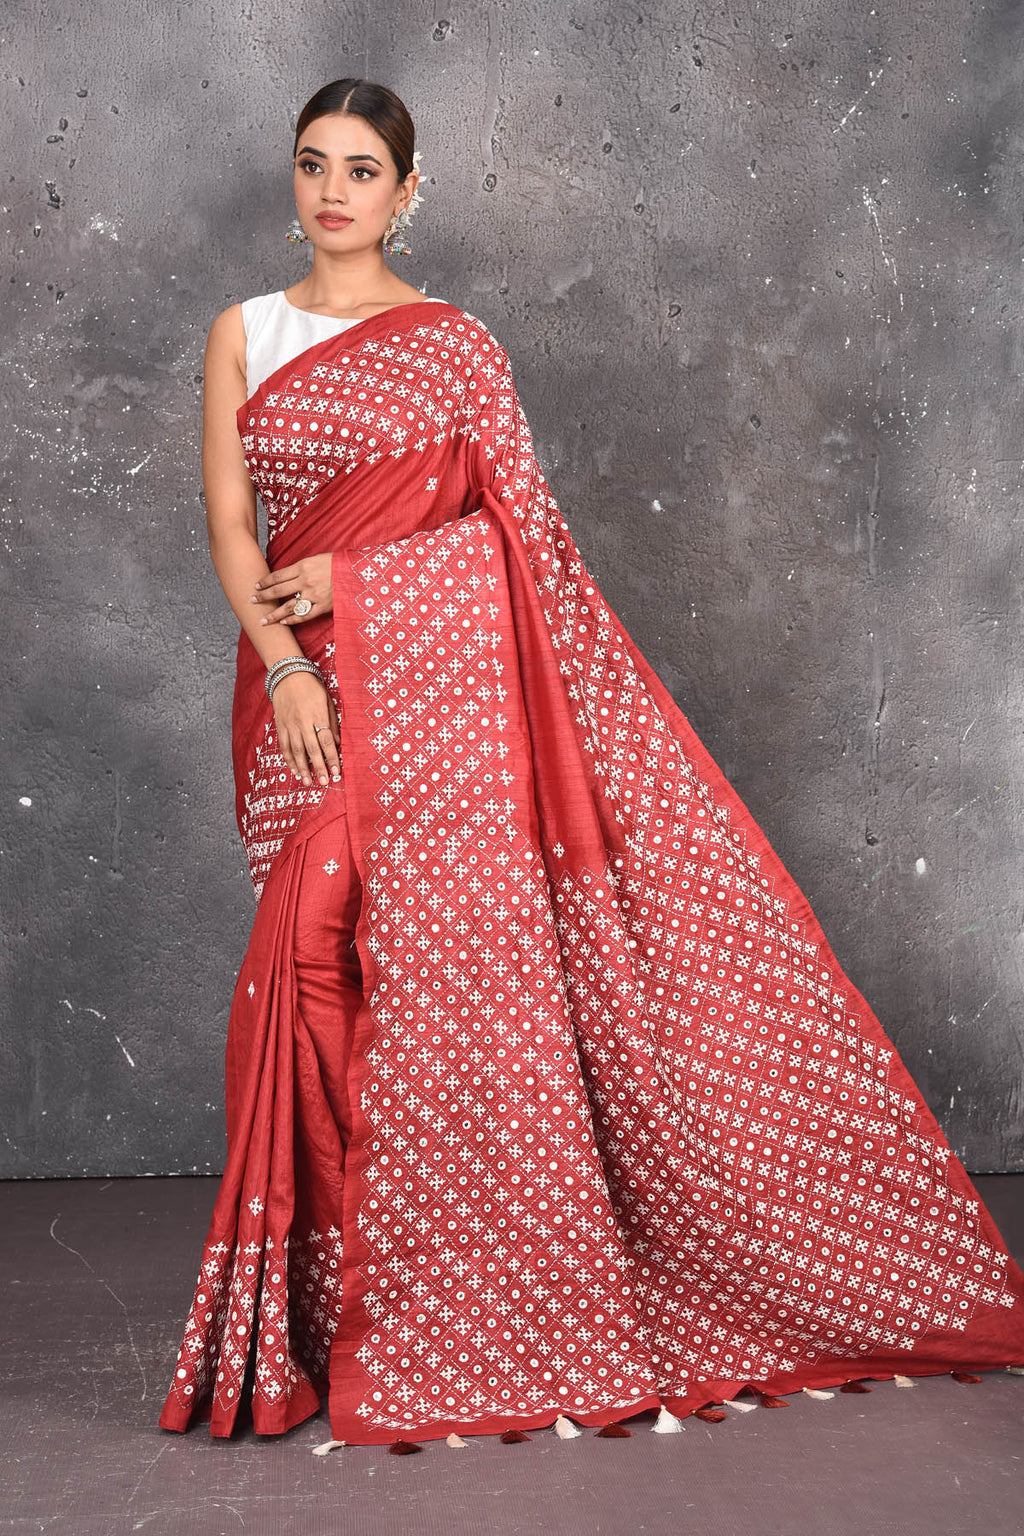 Shop elegant red zari woven pure tussar gicha silk saree in red color with beautiful mirrorwork online in USA which has crafted by skilled weaver of Banaras with elegance and grace, this saree is definitely the epitome of beauty and a must have in your collection. Buy designer handwoven sarees from Pure Elegance which brings you our latest collection of Bhagalpuri handwoven tussar silk sarees.-Full view.